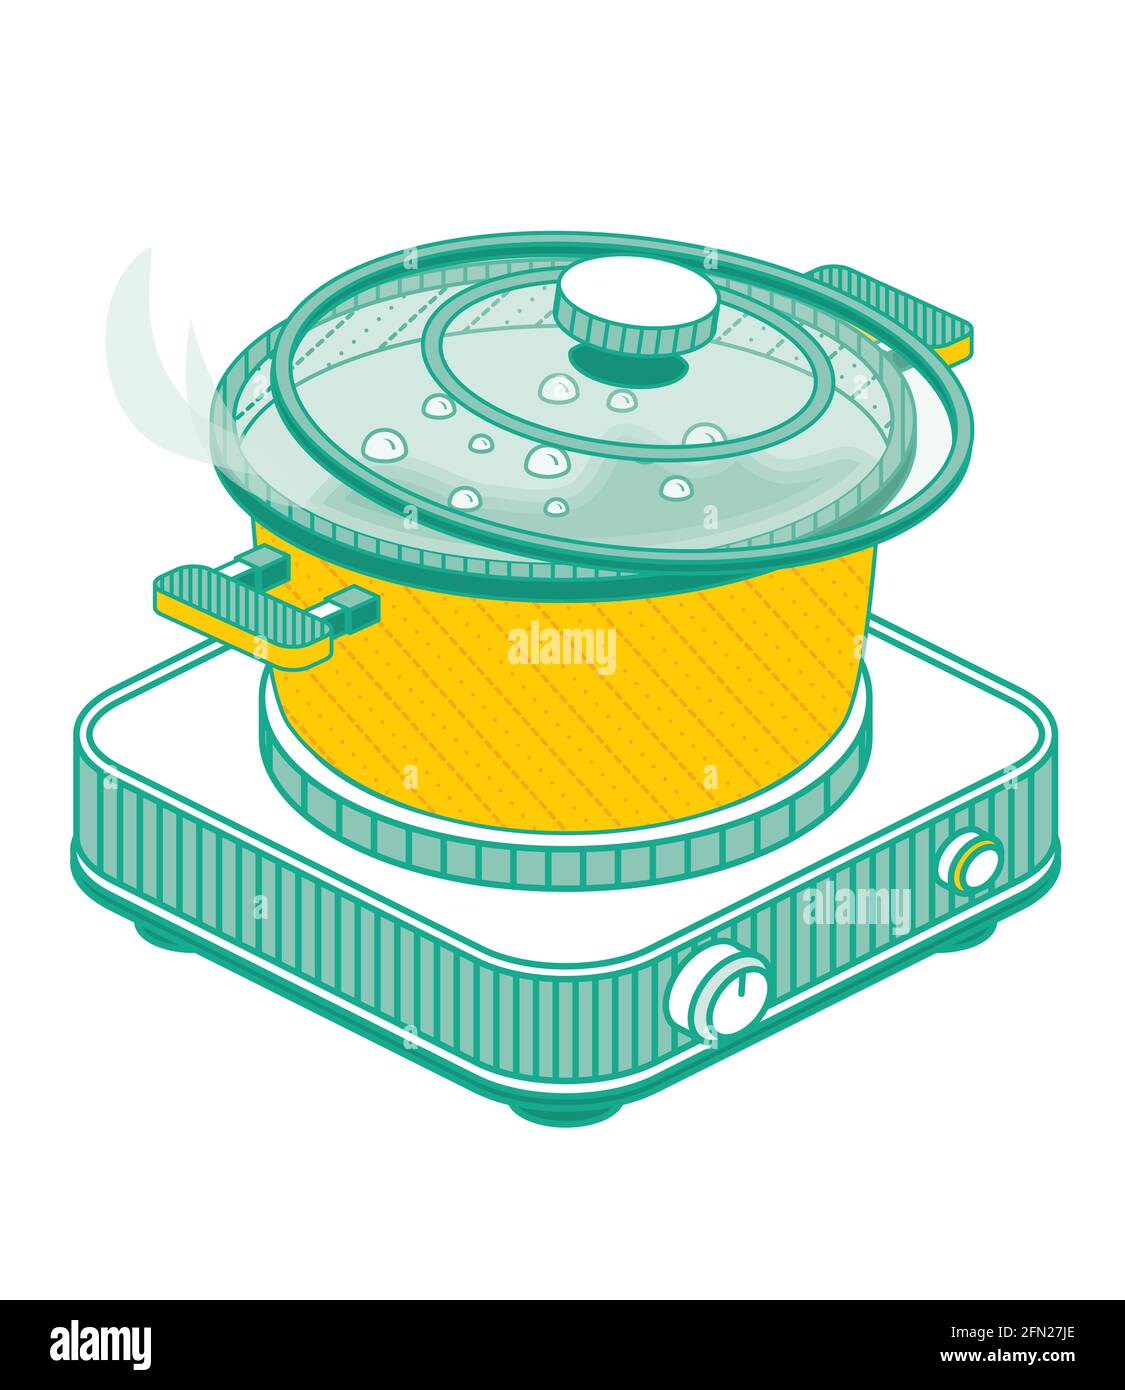 https://c8.alamy.com/comp/2FN27JE/isometric-pan-with-lid-and-boiling-water-on-electric-stove-isolated-on-white-background-vector-illustration-outline-portable-single-burner-electric-2FN27JE.jpg